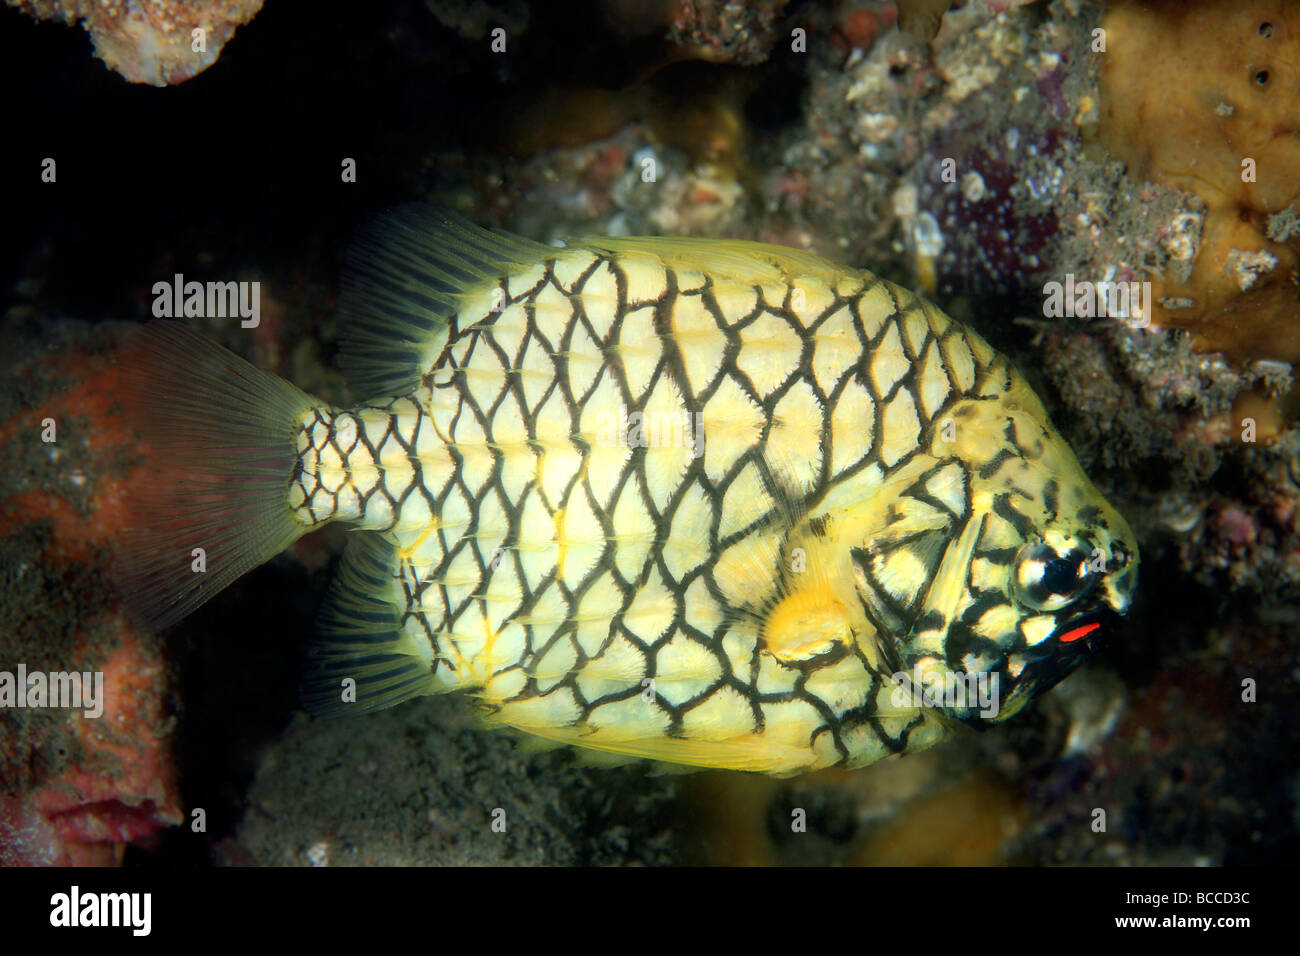 Pineapplefish, Cleidopus gloriamaris, also known as the knightfish .It has a pair of red bioluminescent organs below each eye on the lower jaw. Stock Photo